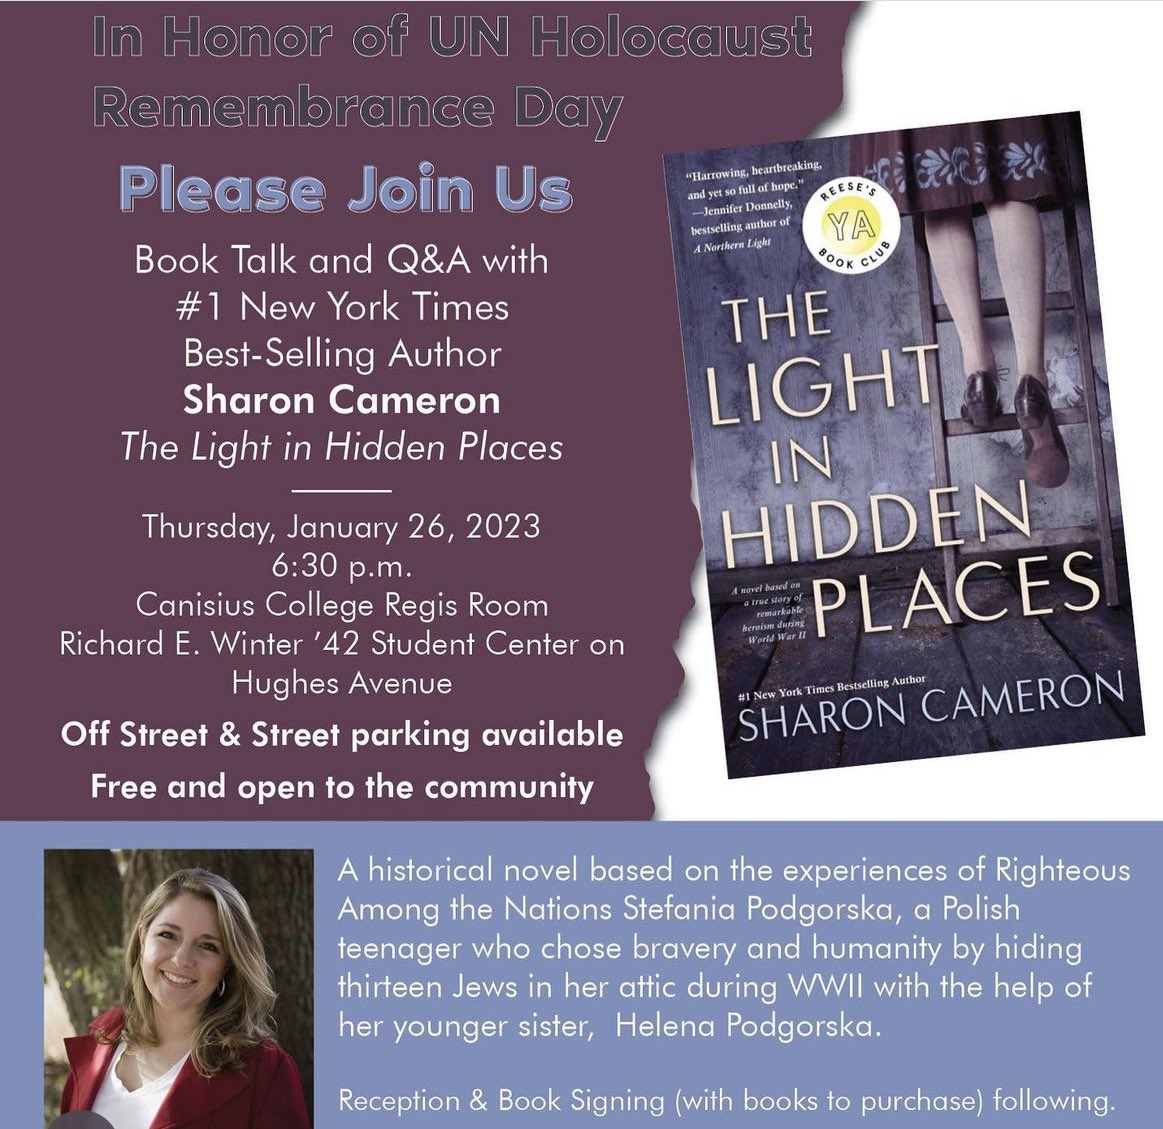 information about Sharon's appearance at Canisius College for UN Holocaust Remembrance Day